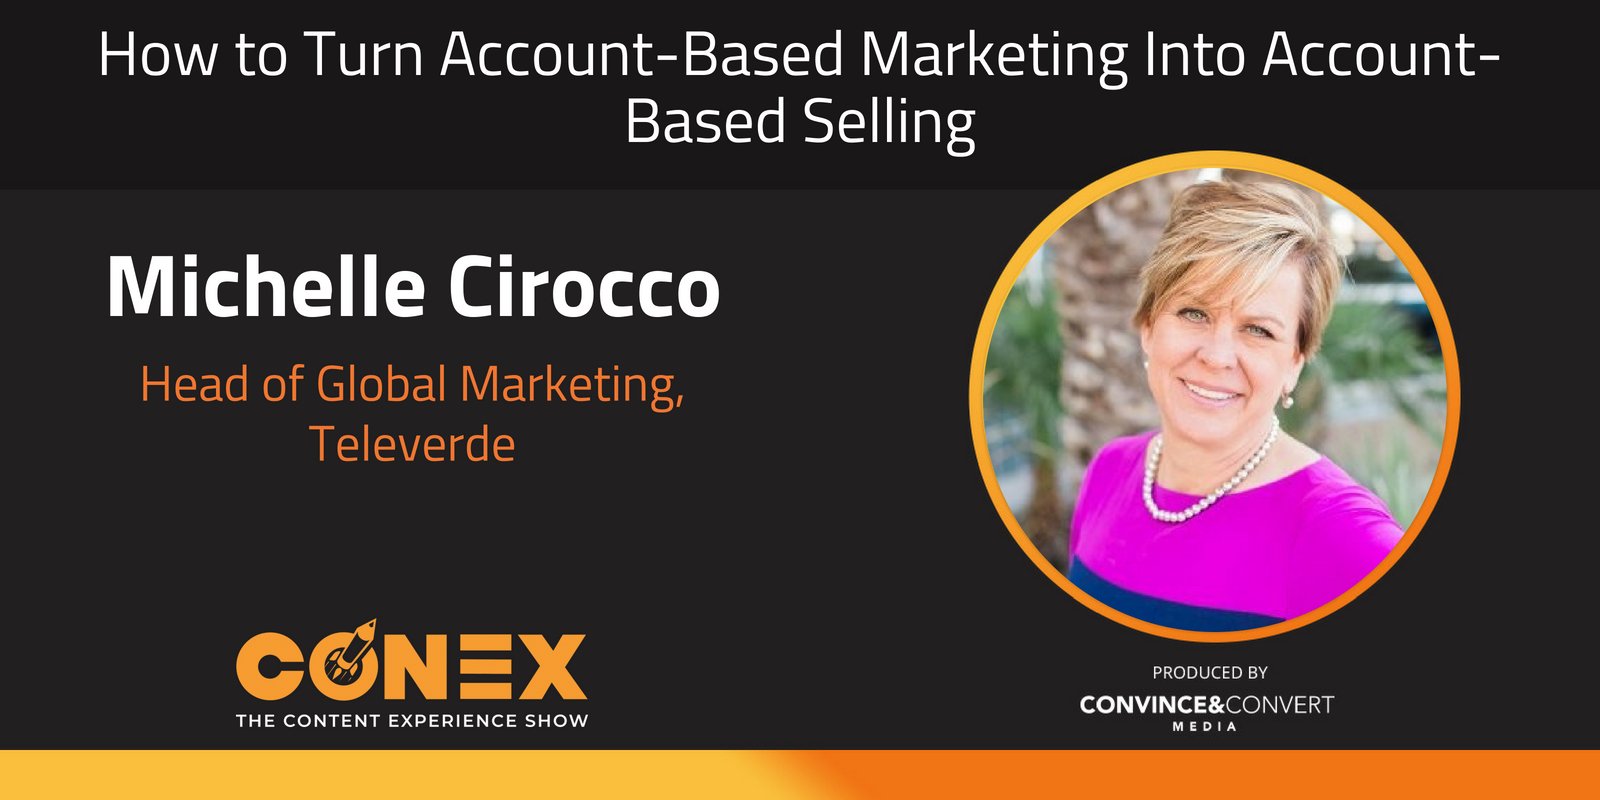 How to Turn Account-Based Marketing Into Account-Based Selling